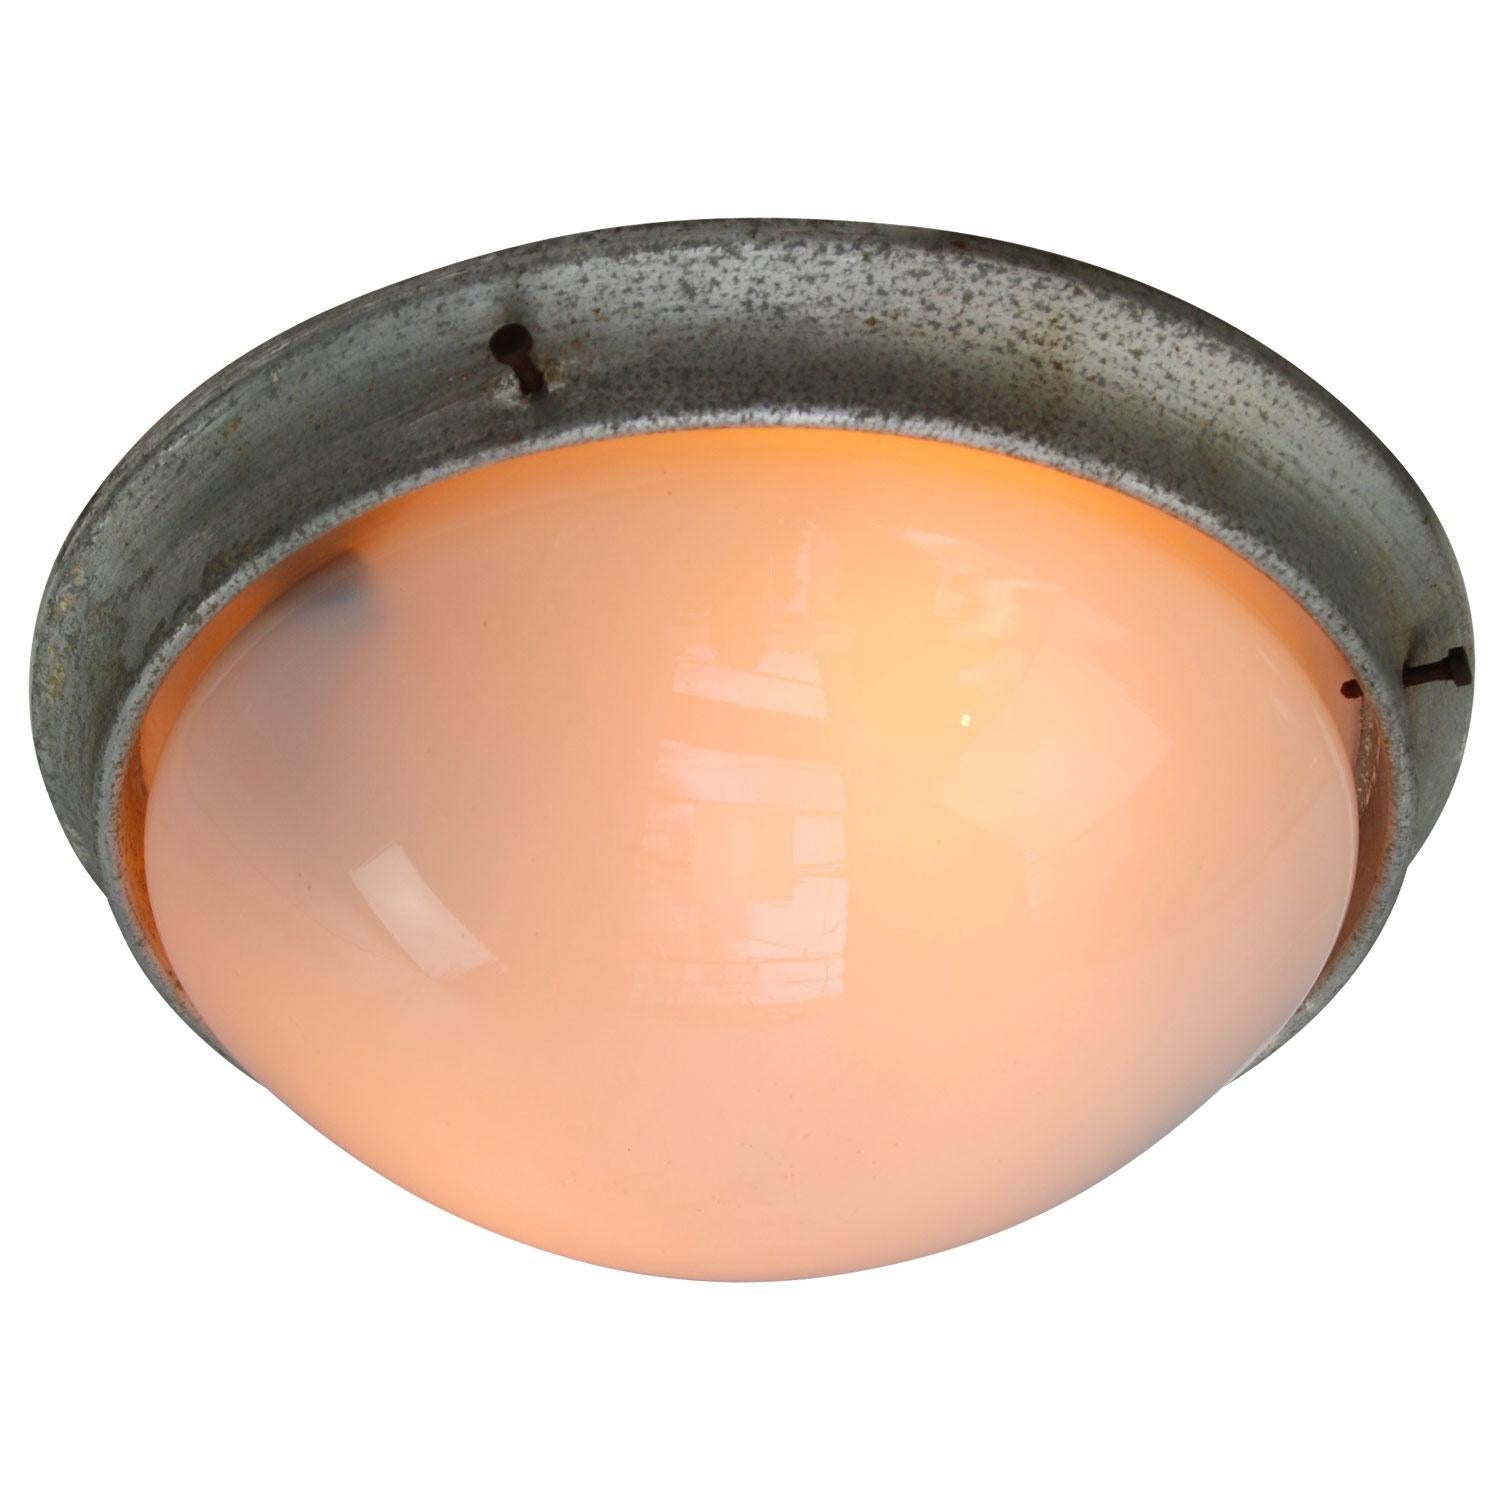 Industrial ceiling and wall lamp. Aluminum base with white Opaline glass.

Weight: 0.50 kg / 1.1 lb

All lamps have been made suitable by international standards for incandescent light bulbs, energy-efficient and LED bulbs. E26/E27 bulb holders